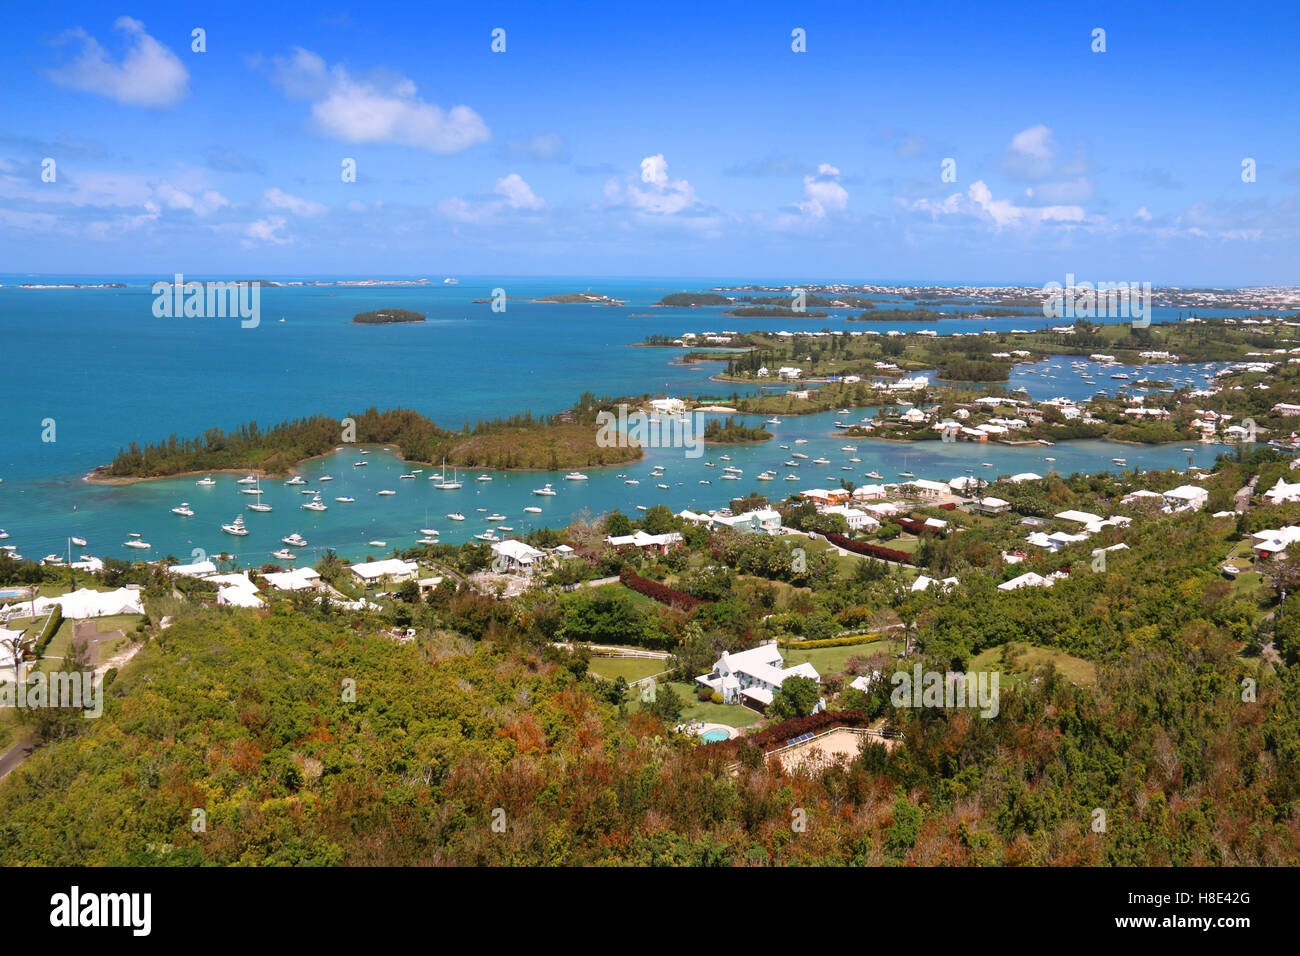 Bermuda tropical landscape view from above, St Anne's, Bermuda. Stock Photo